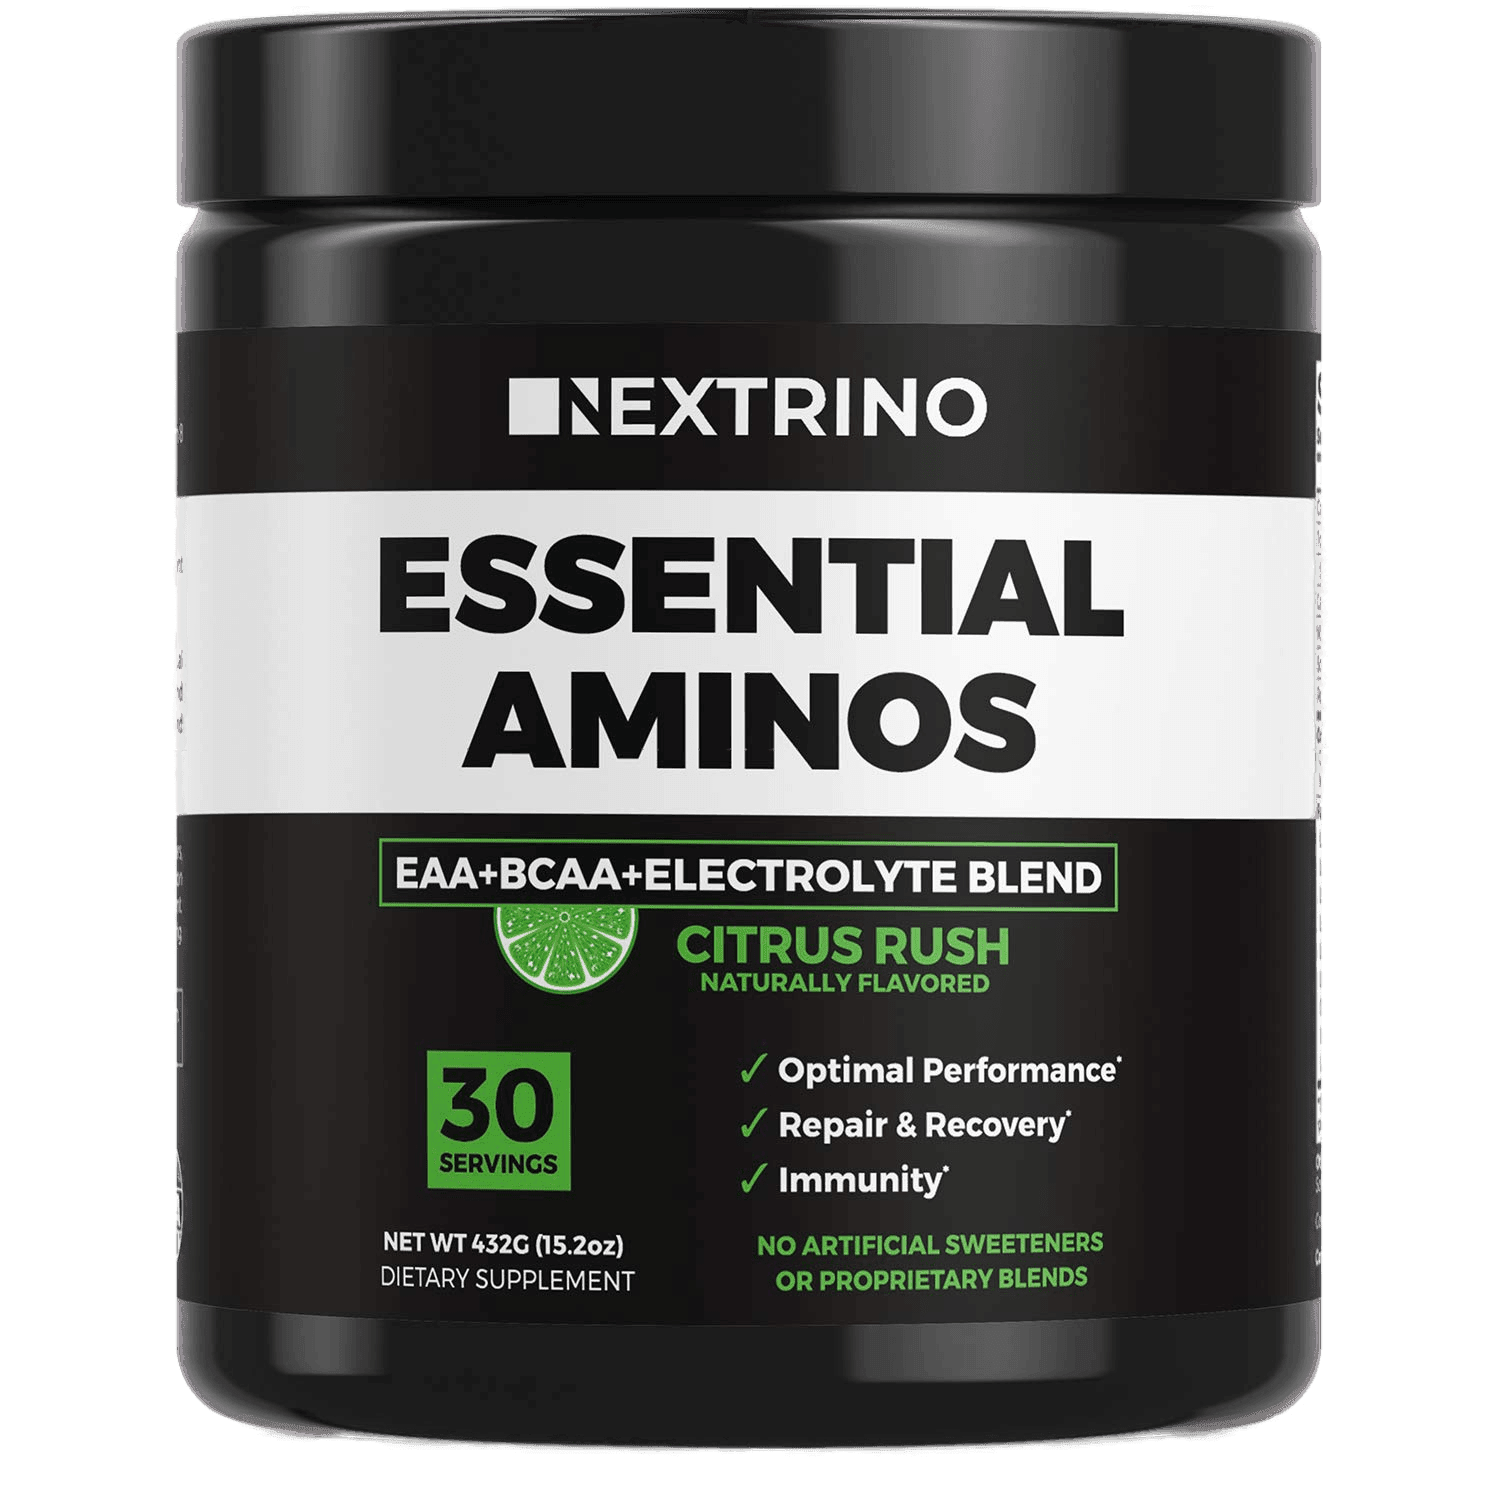 Nextrino EAA - The Supplements Factory